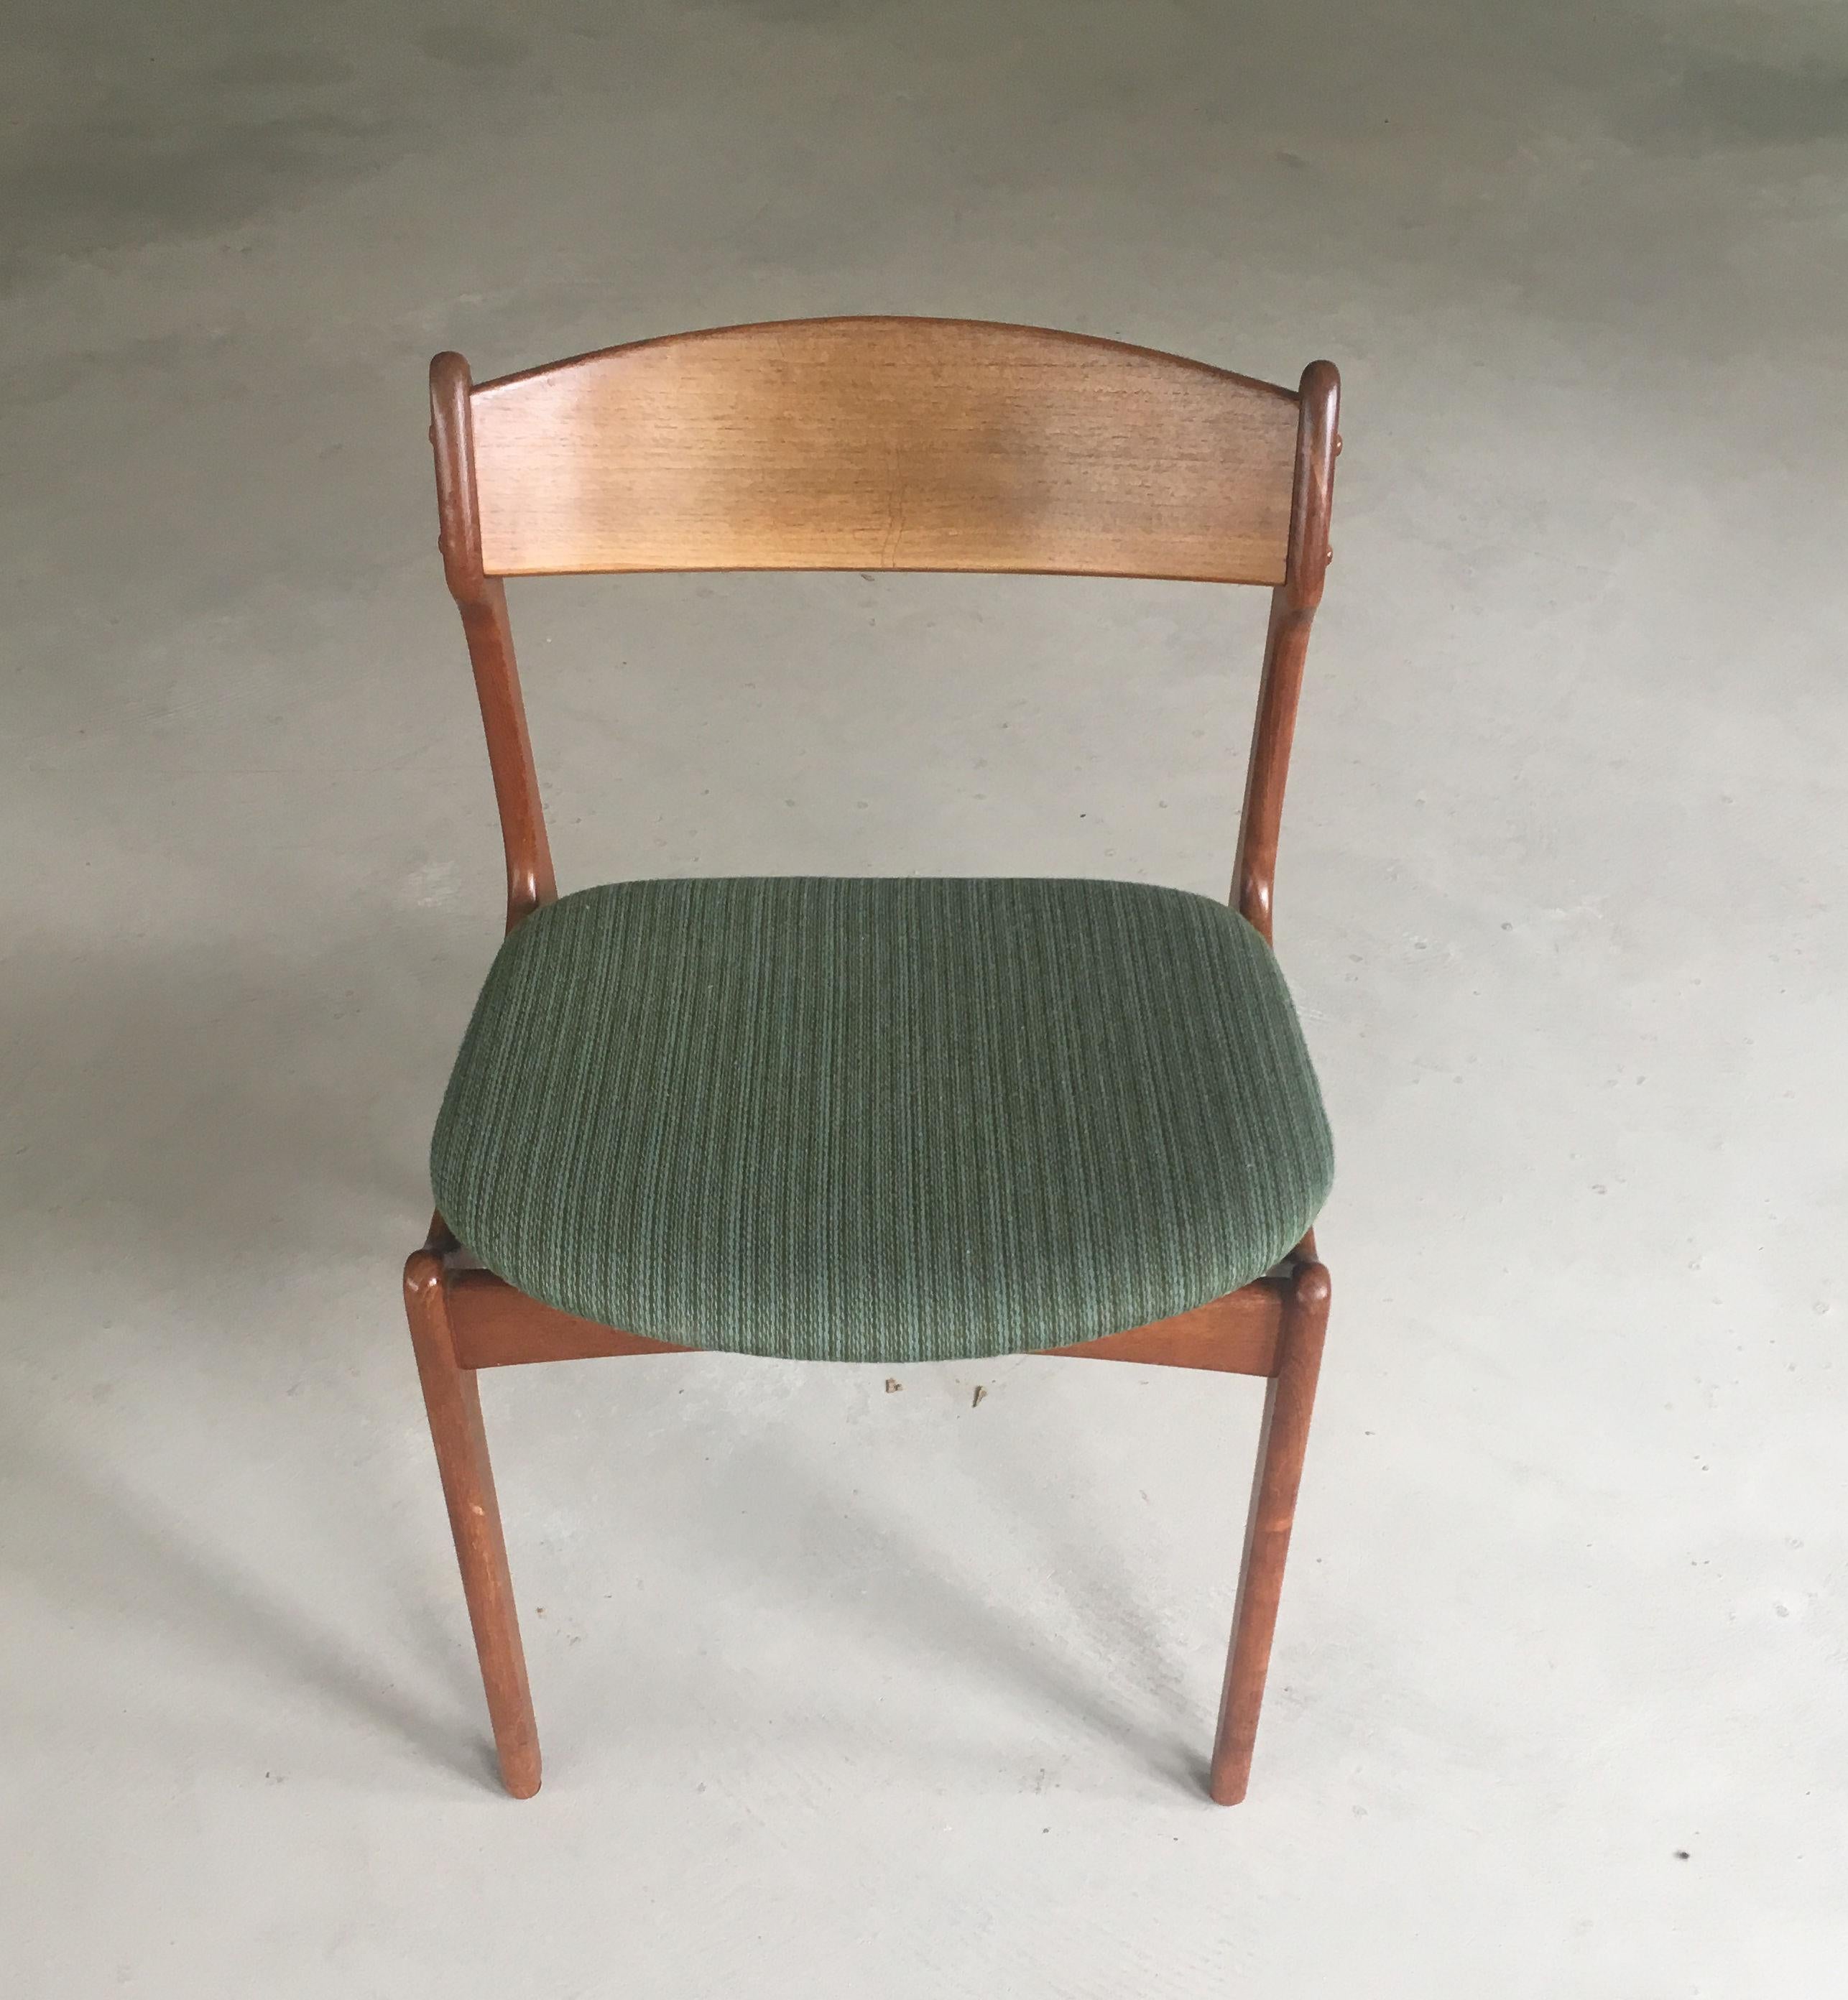 Set of six restored and refinished Danish Erik Buch dining chairs in teak, Inc. custom upholstery

This rarely seen version of one of Erik Buchs most popular chairs with their floating seats has a backrest in teak veneer.

The chairs have been fully